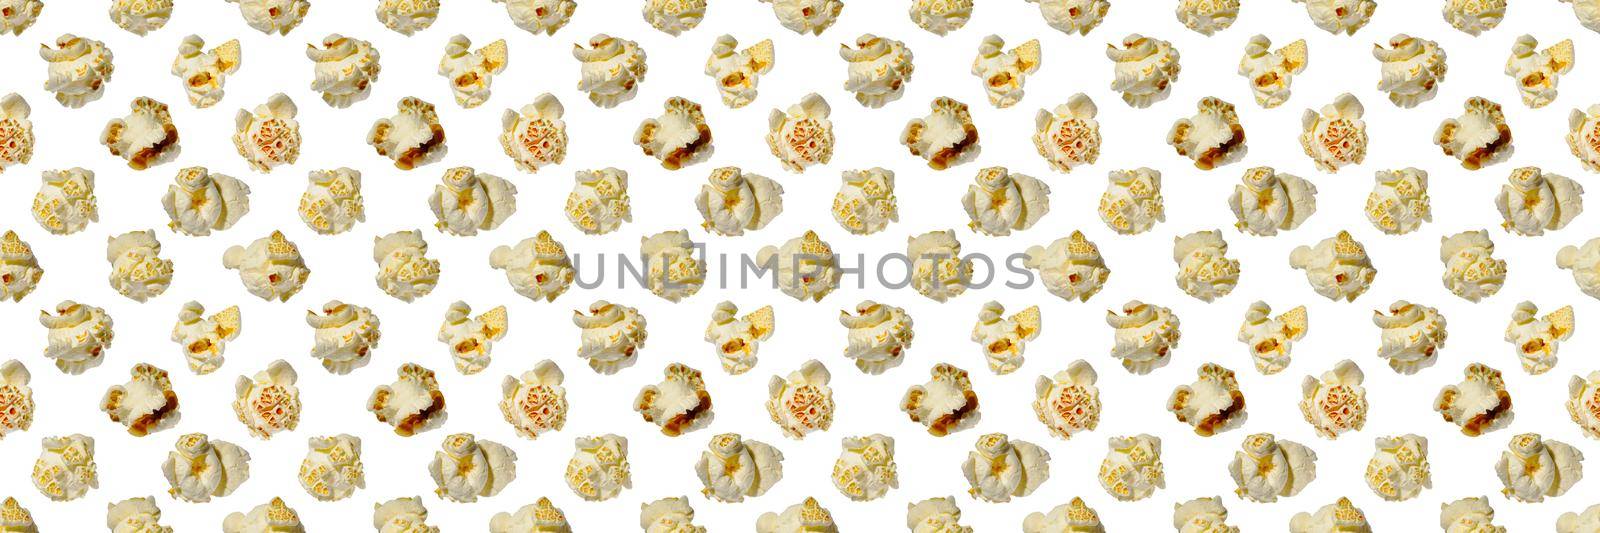 Rich collection of popcorn, isolated on white background by PhotoTime